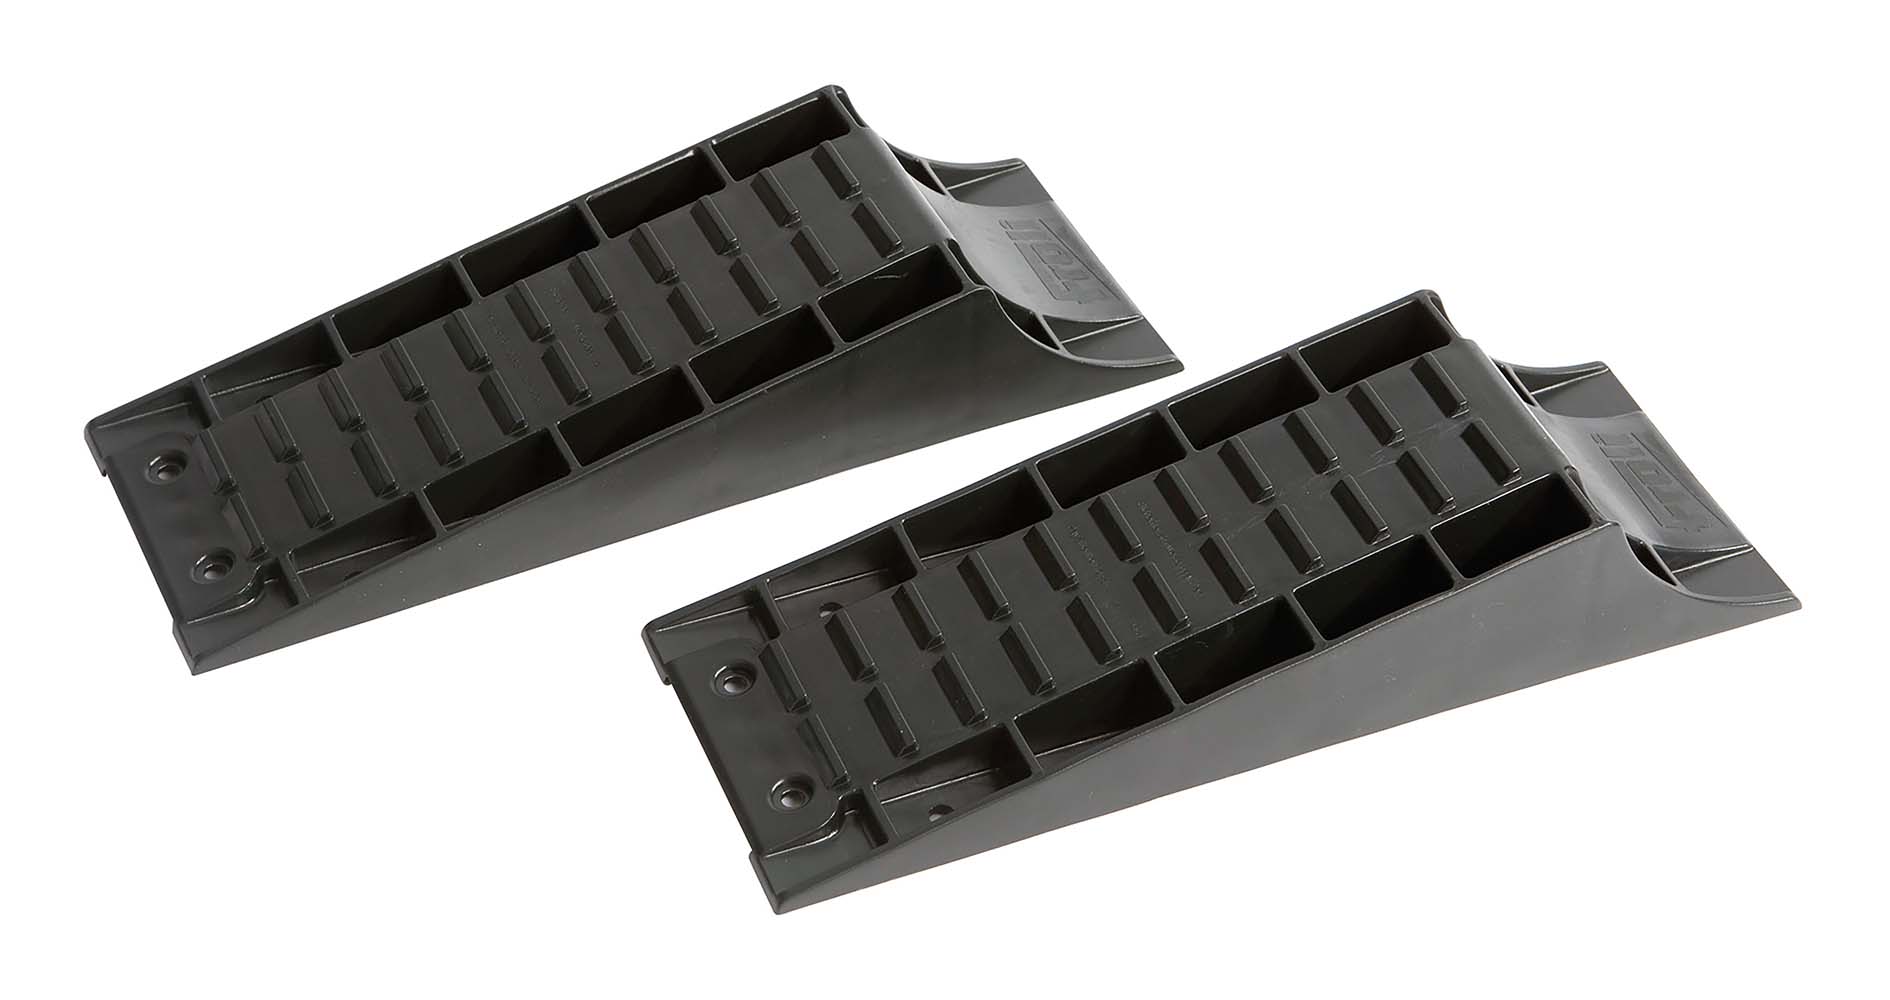 5324350 A set of 2 sturdy levellers. Ideal for placing the caravan or camper level, to protect the wheels. The extra strong and fibre reinforced leveller can be used for a caravan or camper up to 8000 kilograms.